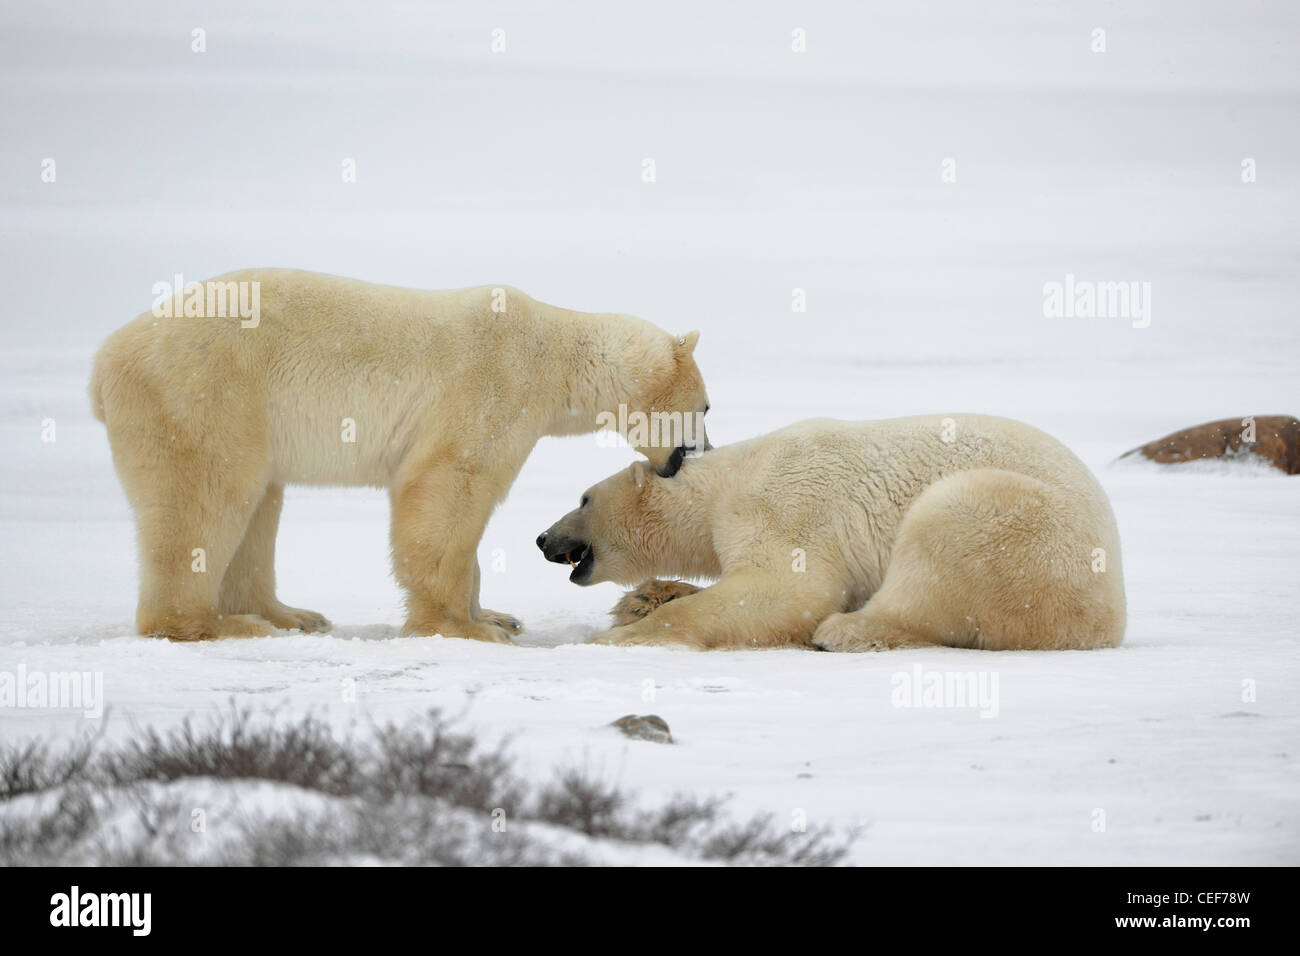 Two bears fight, one suffices another teeth for a nape. Stock Photo